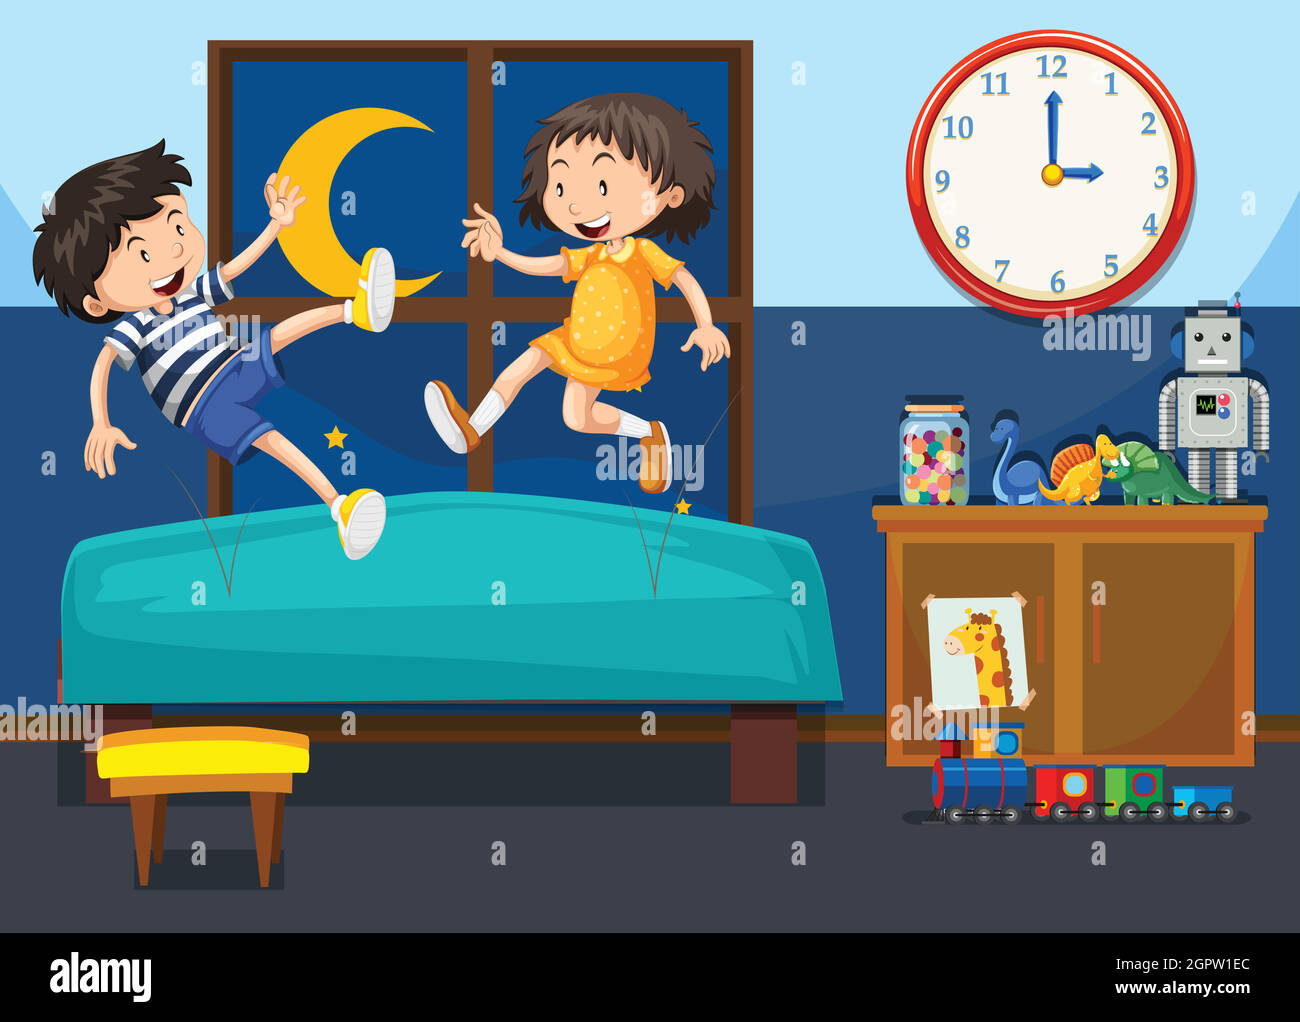 boy-and-girl-playing-on-the-bed-stock-vector-image-art-alamy